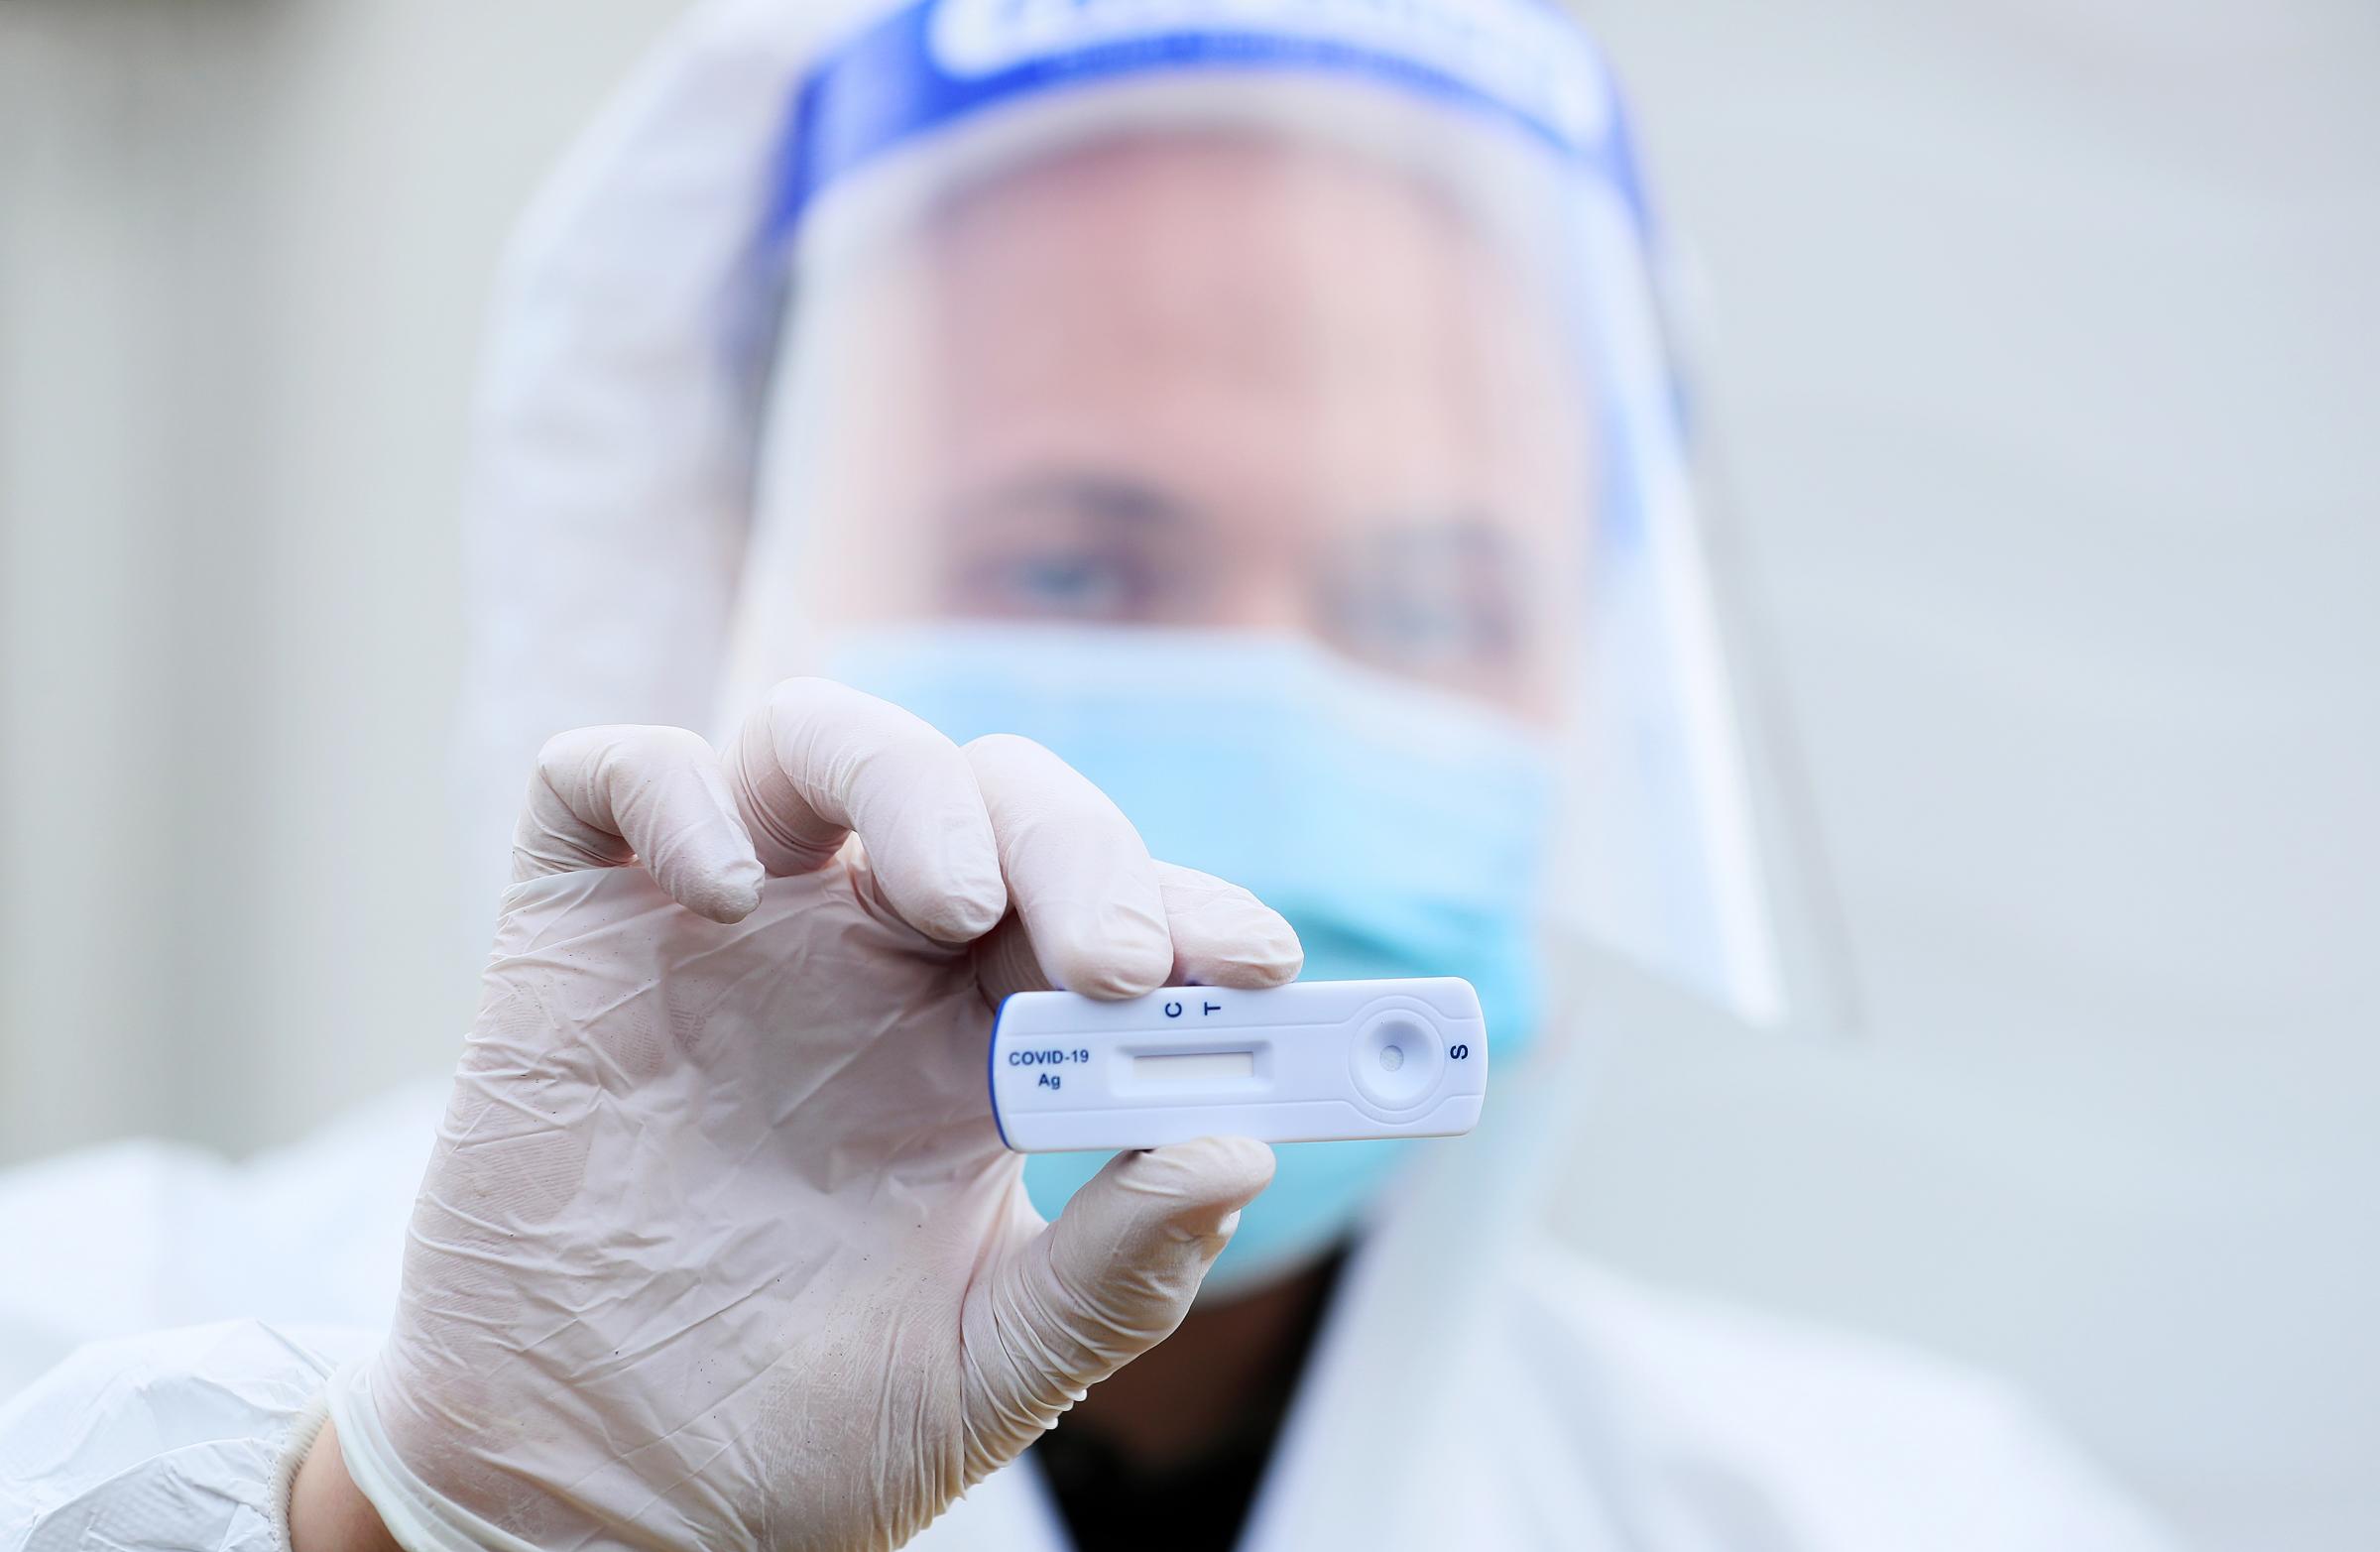 A lab technician holds a Healgen Covid-19 Rapid Antigen Test at RocDocs testing facility in Gorey, Co. Wexford, for lorry drivers bound for France. The healthcare company has signed a contract with the Department of Transport to provide rapid Covid-19